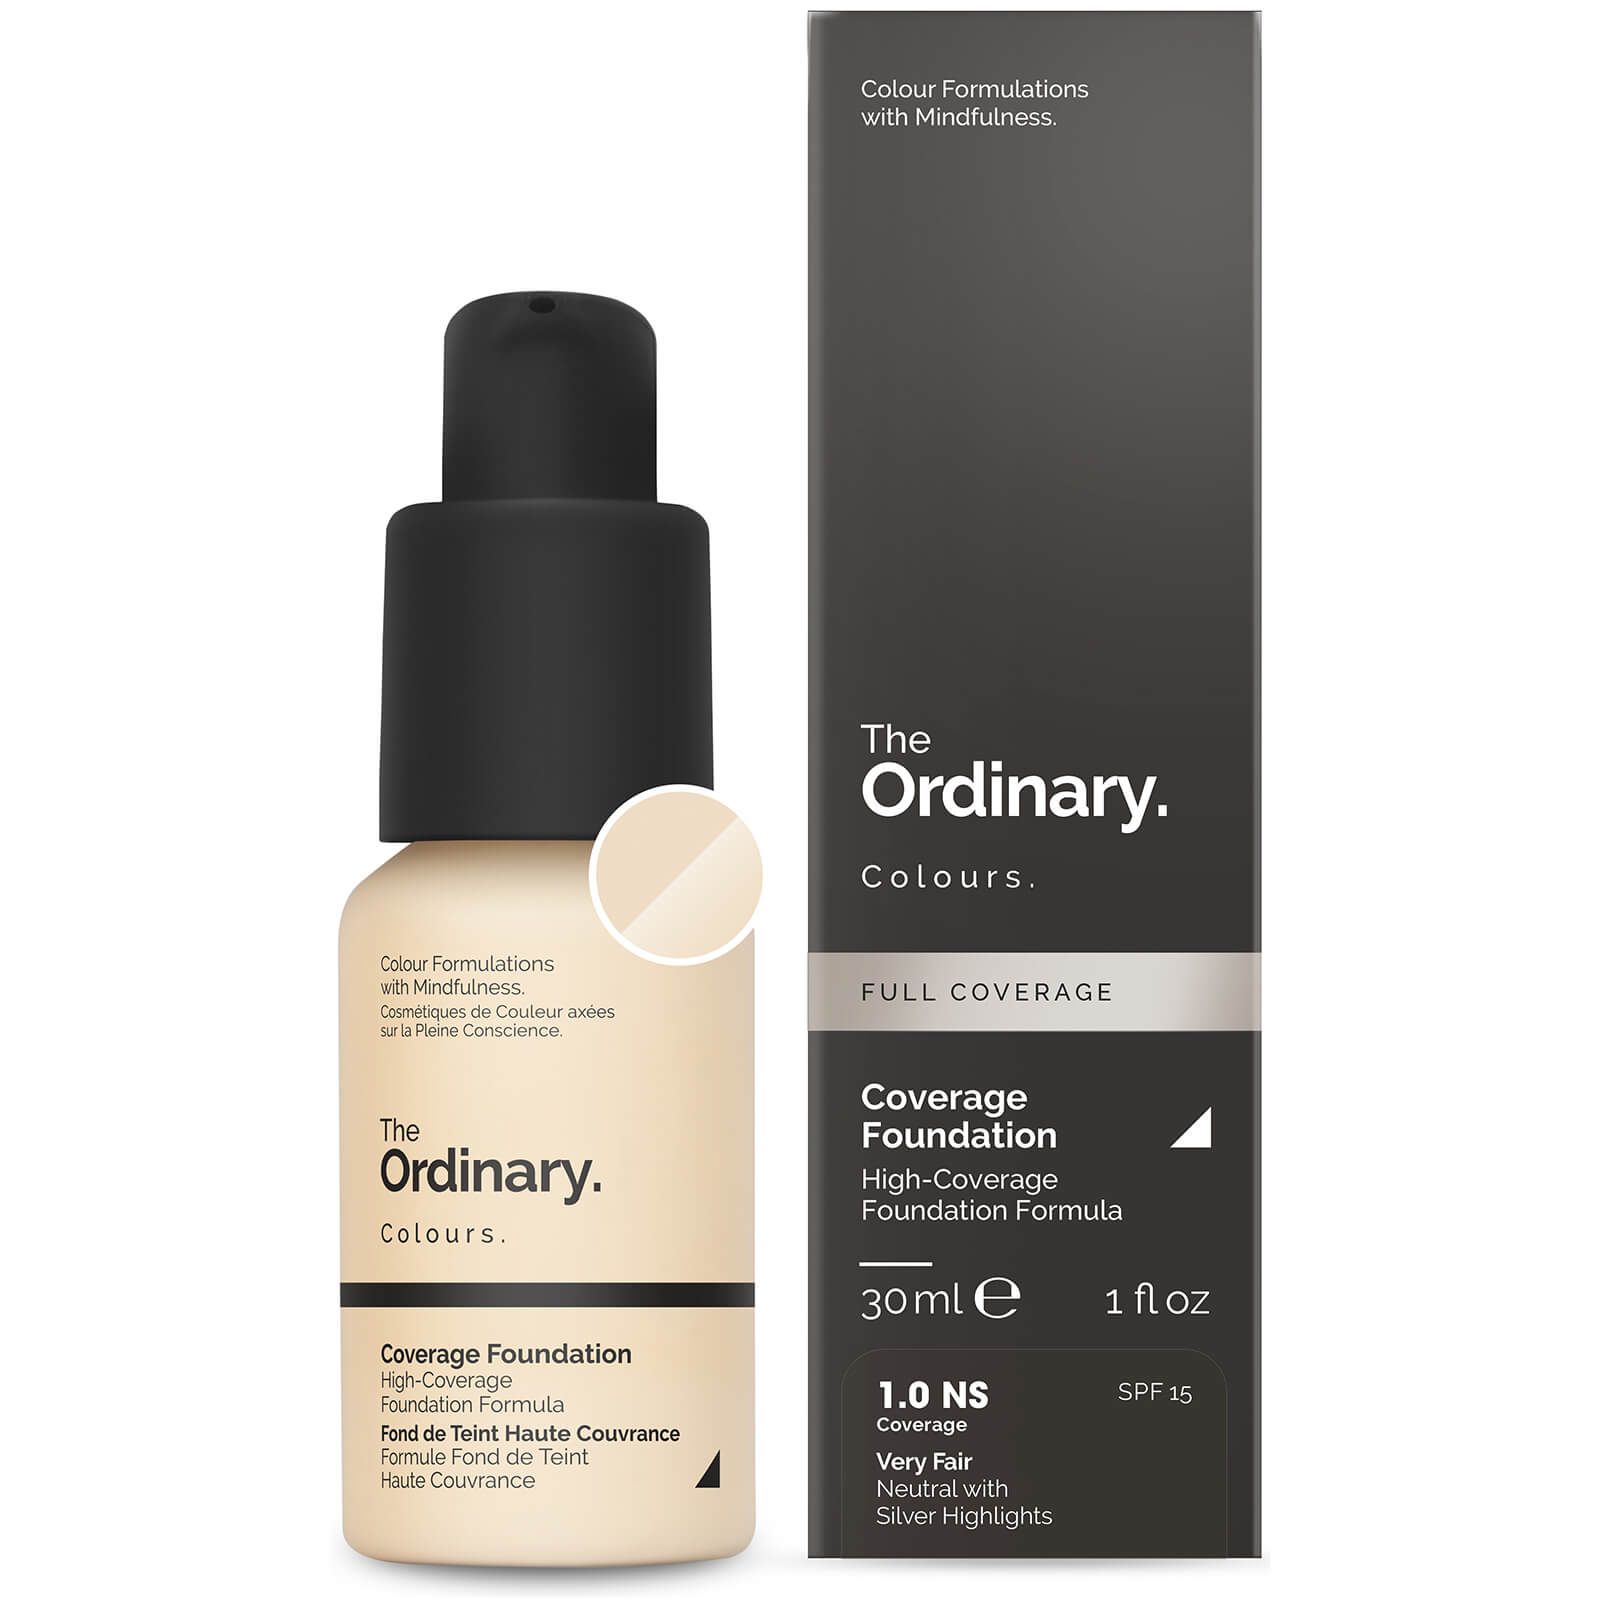 The Ordinary Coverage Foundation with SPF 15 by The Ordinary Colours 30ml (Ulike fargetoner) - 1.0NS